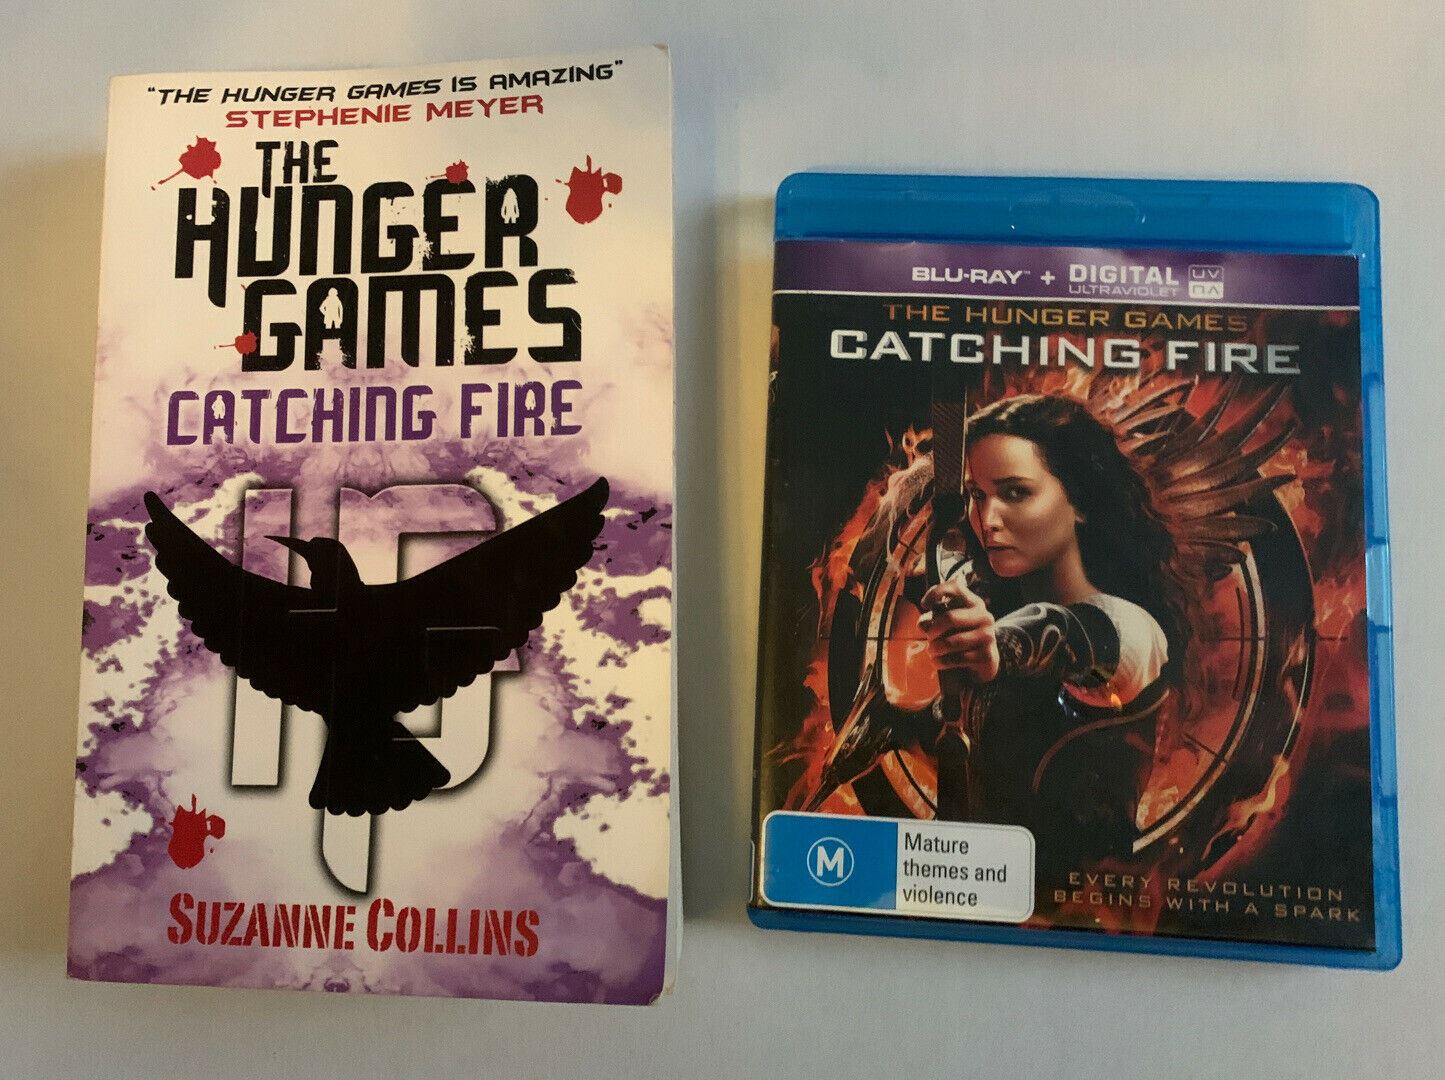 The Hunger Games Catching Fire by Suzanne Collins (Paperback, 2009) & Bluray